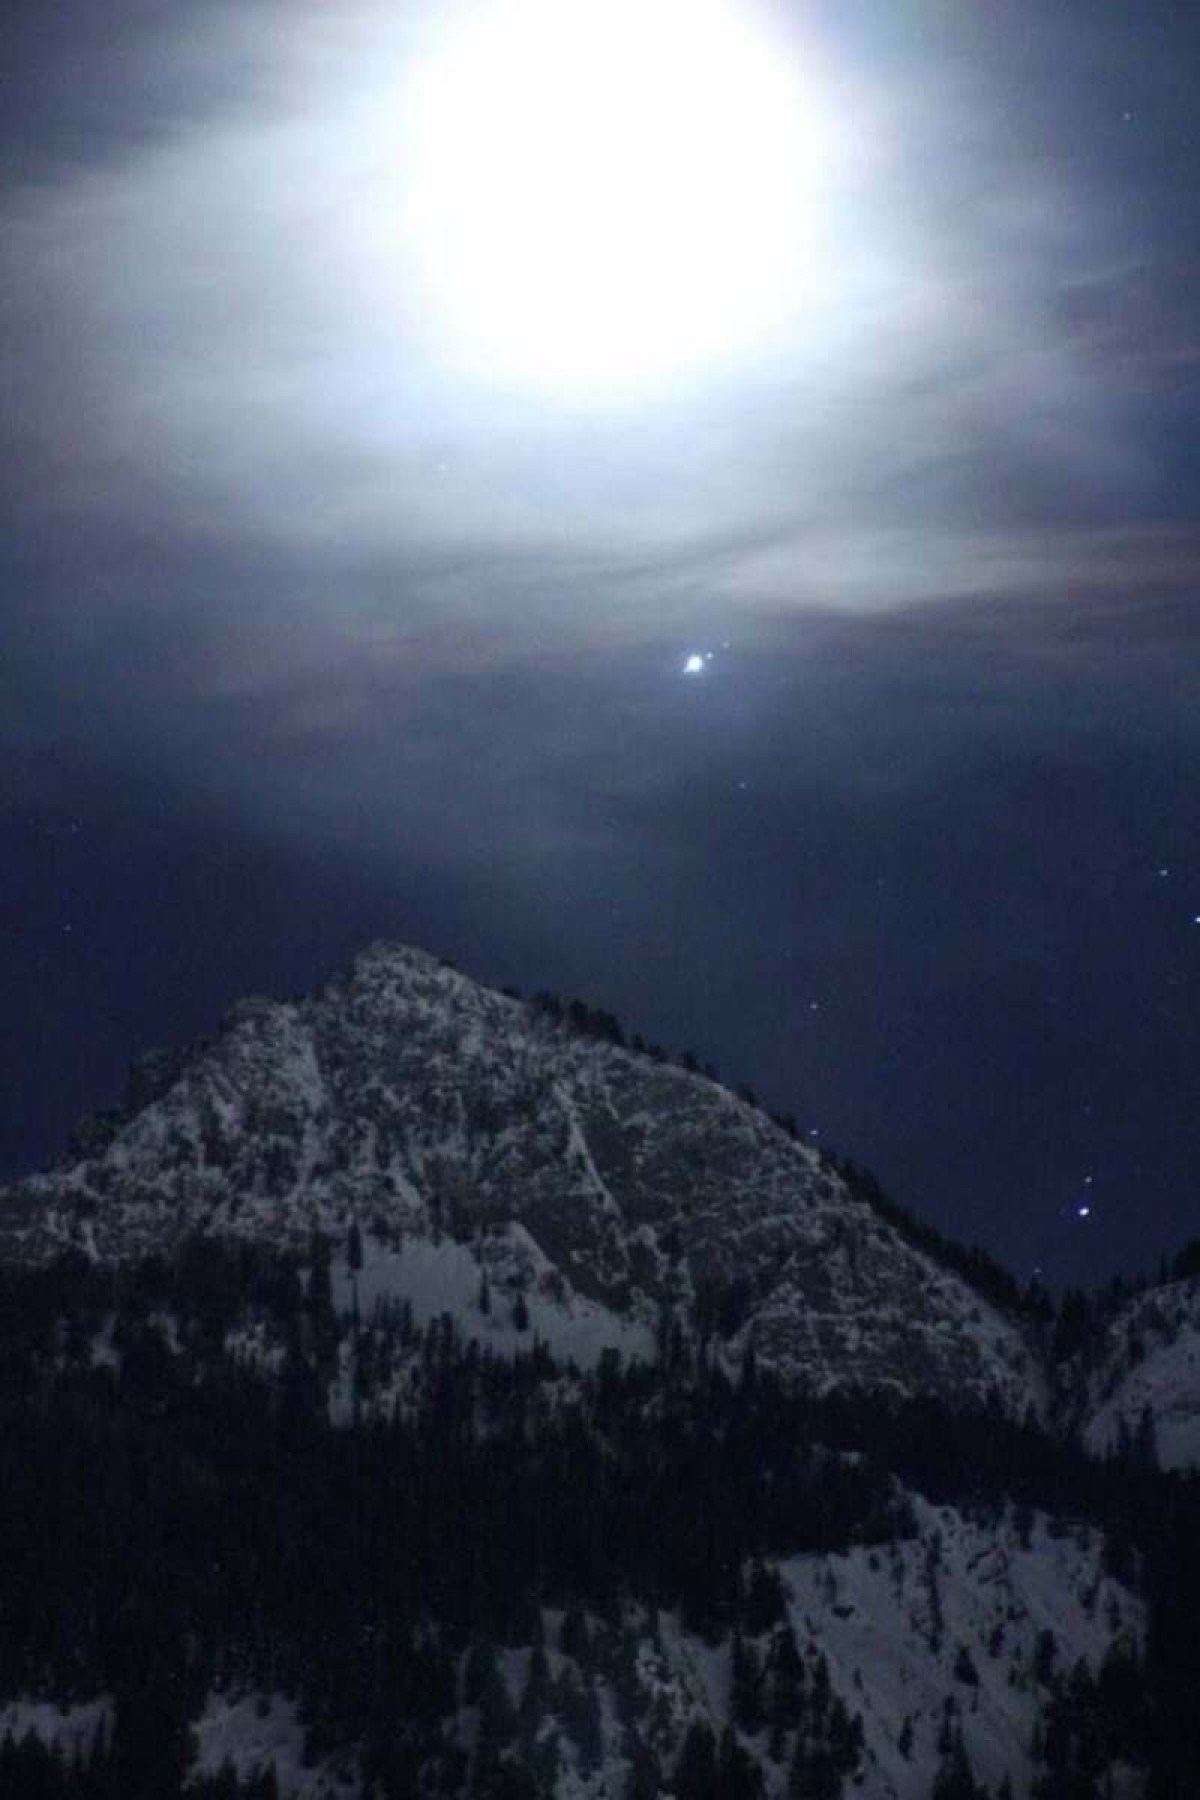 As the moon rose over the Wasatch Mountains near Salt Lake City on February 27, 2019, the planet Jupiter could be seen, along with three of its largest moons.  Astronomers should get a similar view of Jupiter at opposition on Monday (9/26)